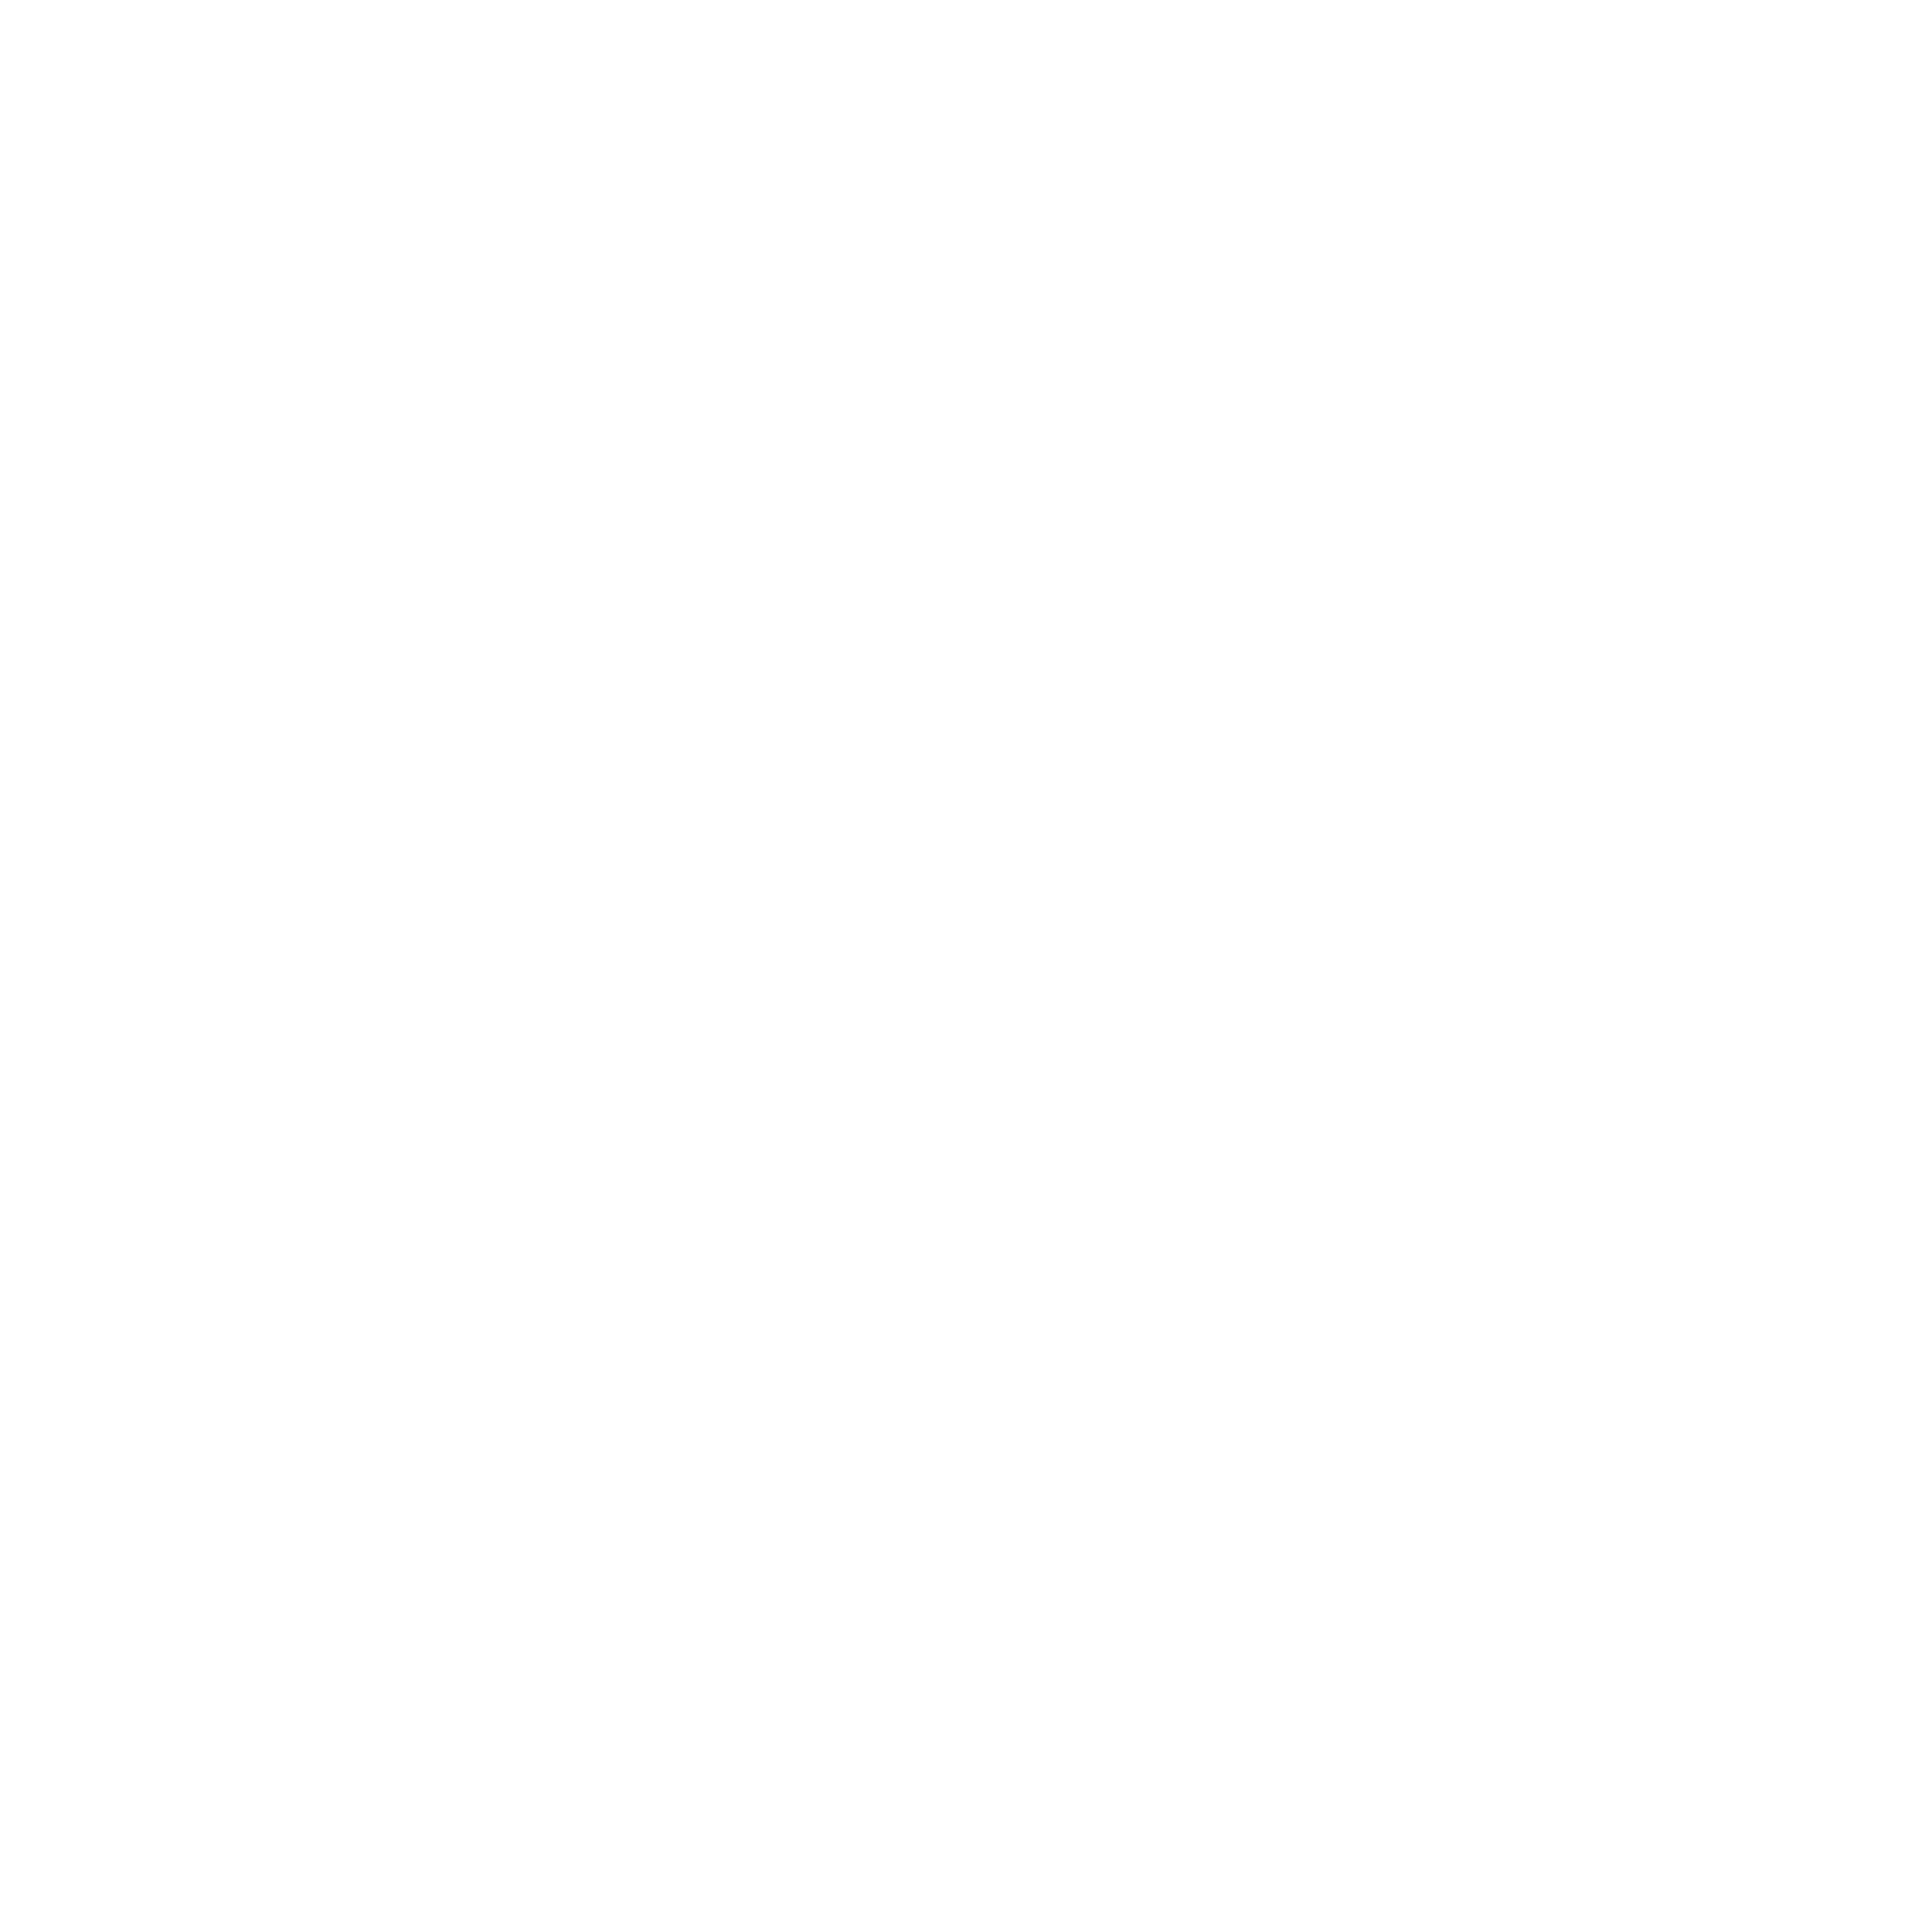 otp-bank-01.png